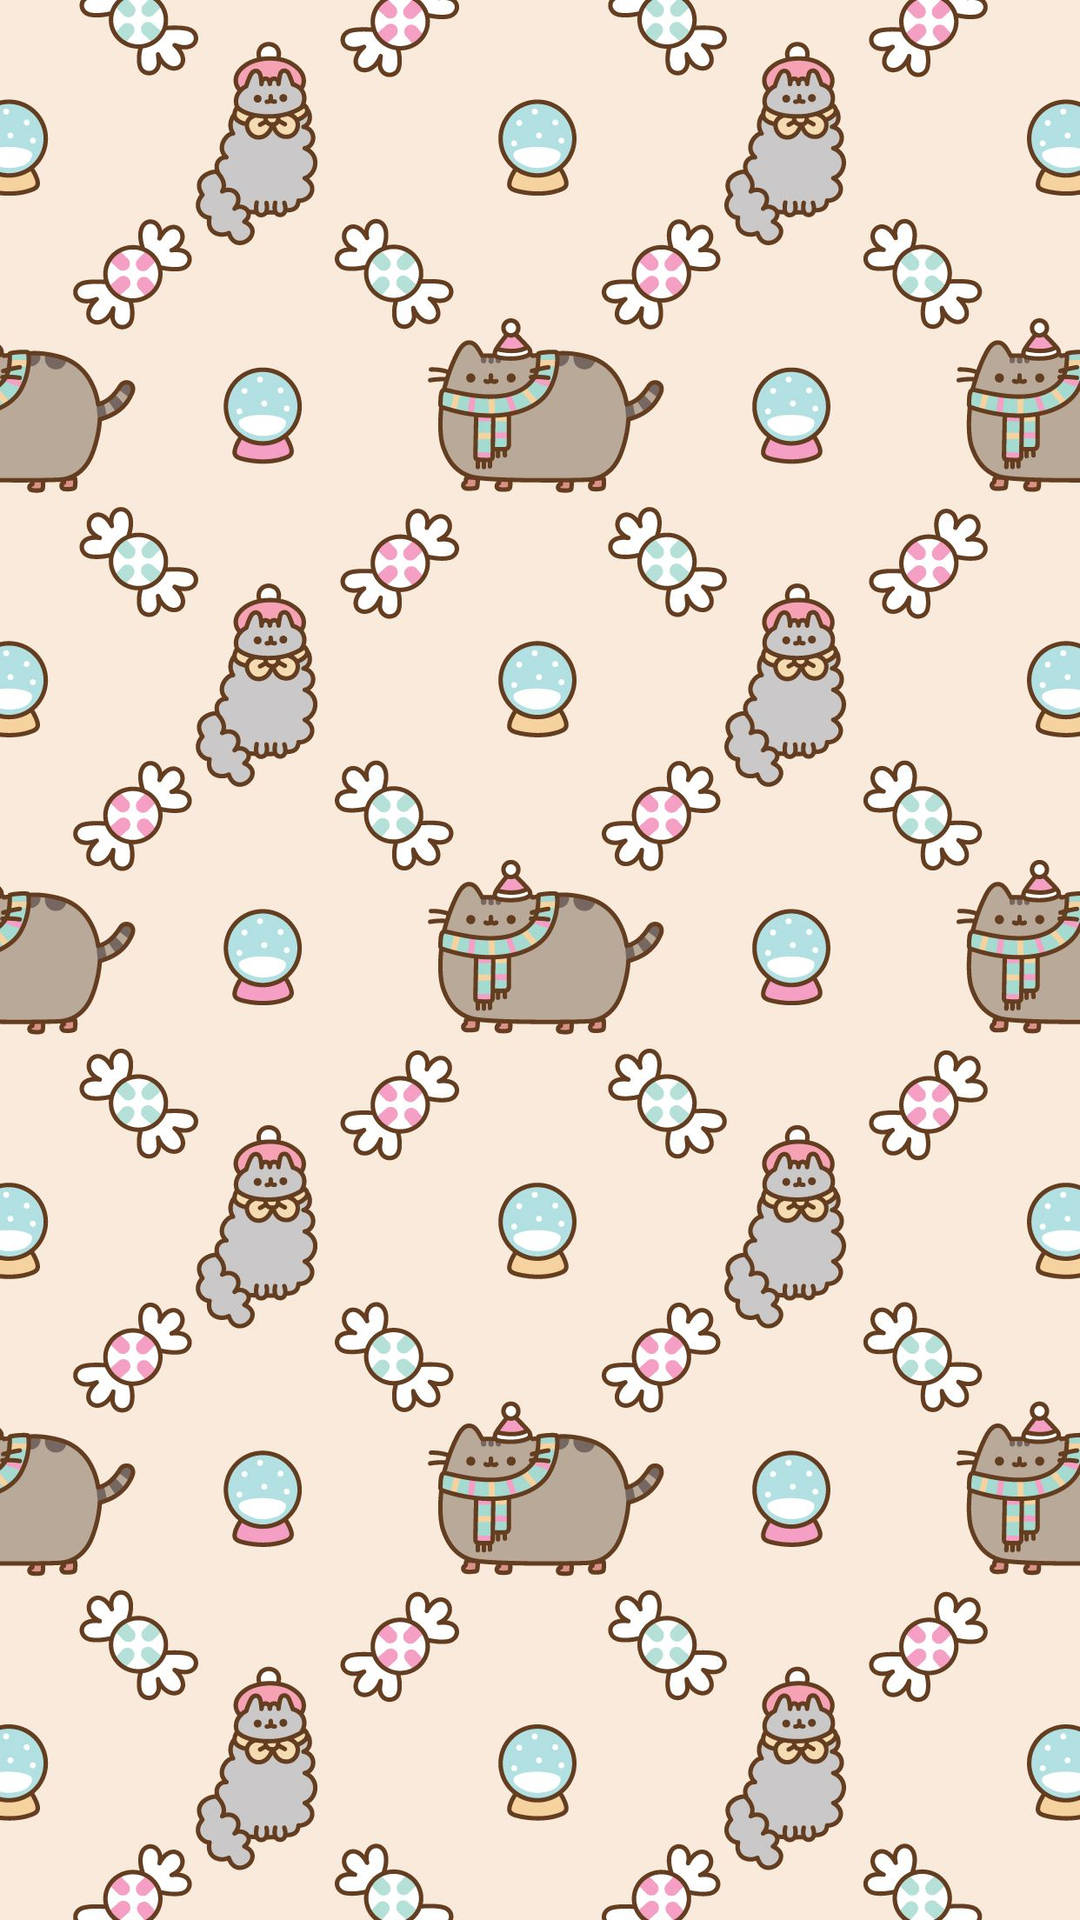 Celebrating Christmas with Pusheen&Stormy Wallpaper